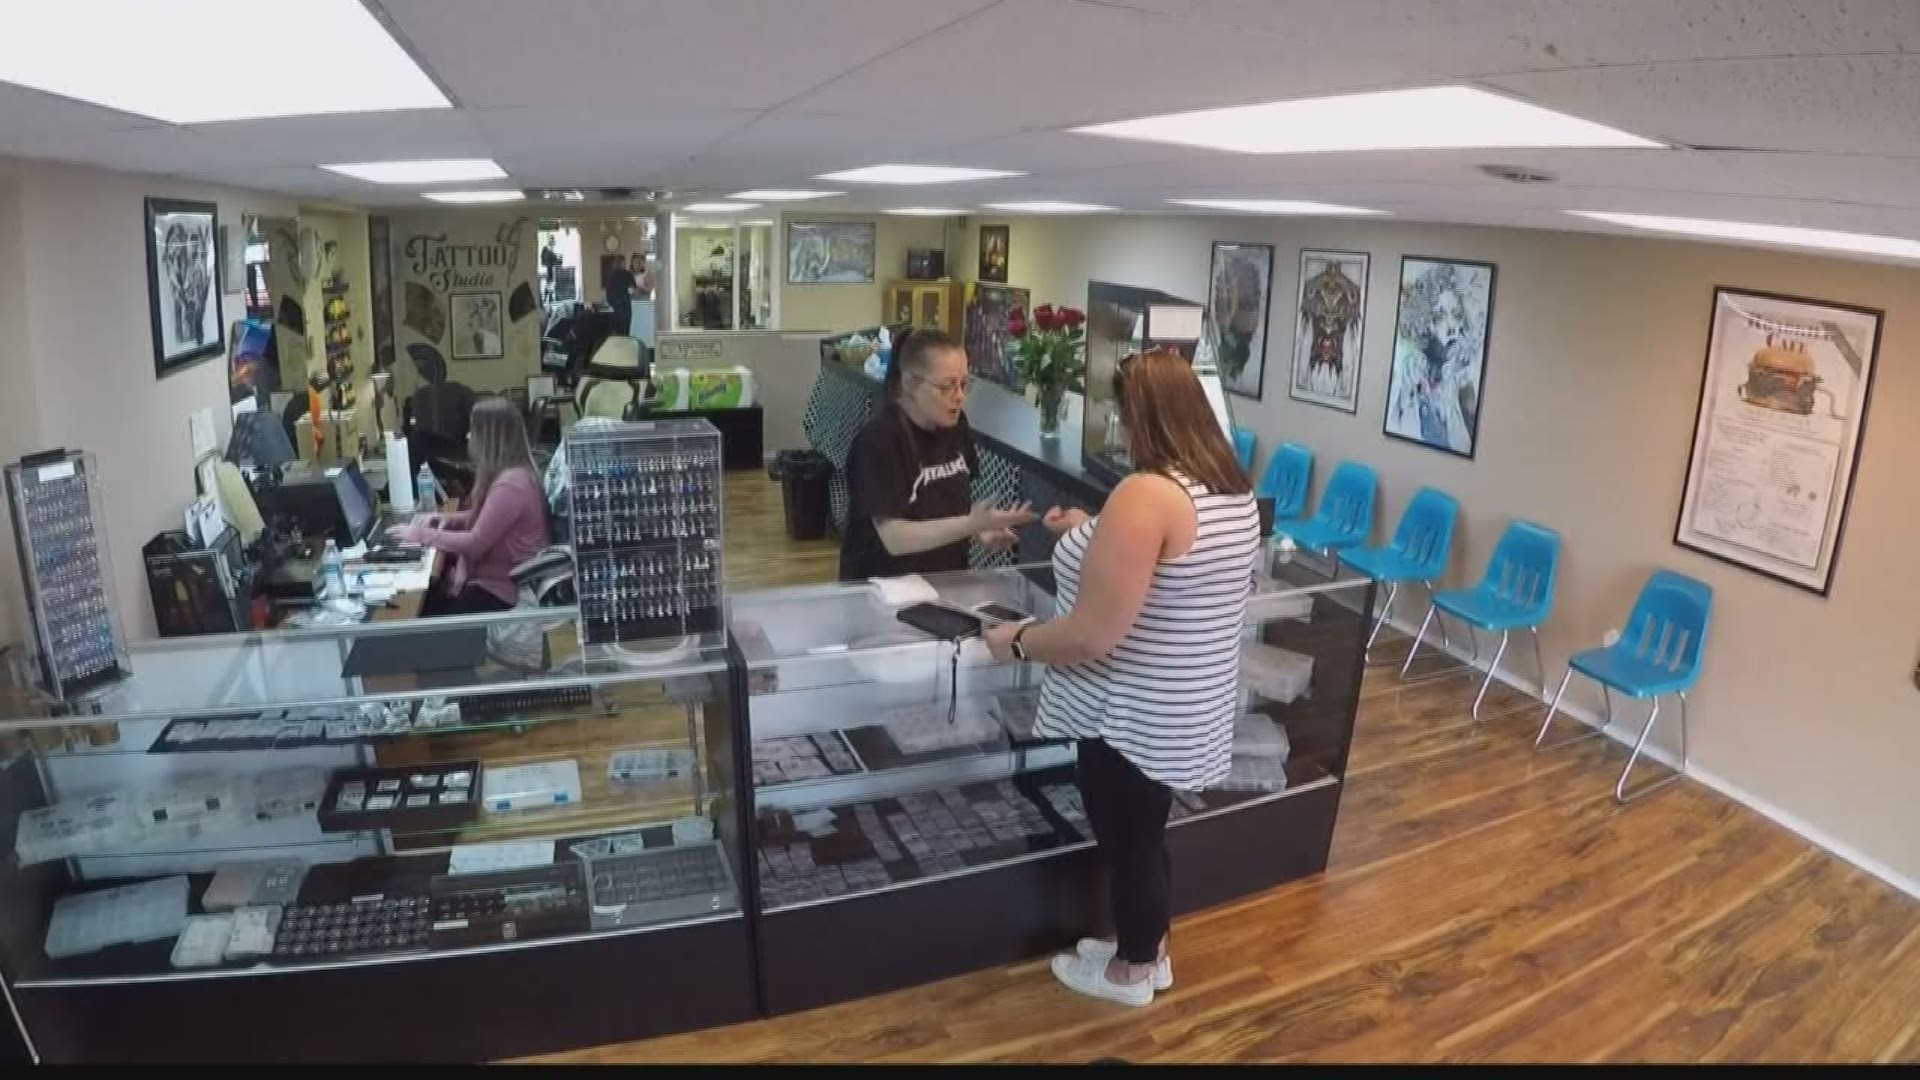 KREM Reporter Taylor Viydo visited a Sandpoint tattoo shop that has reopened three months after a fire devastated it and other downtown businesses.